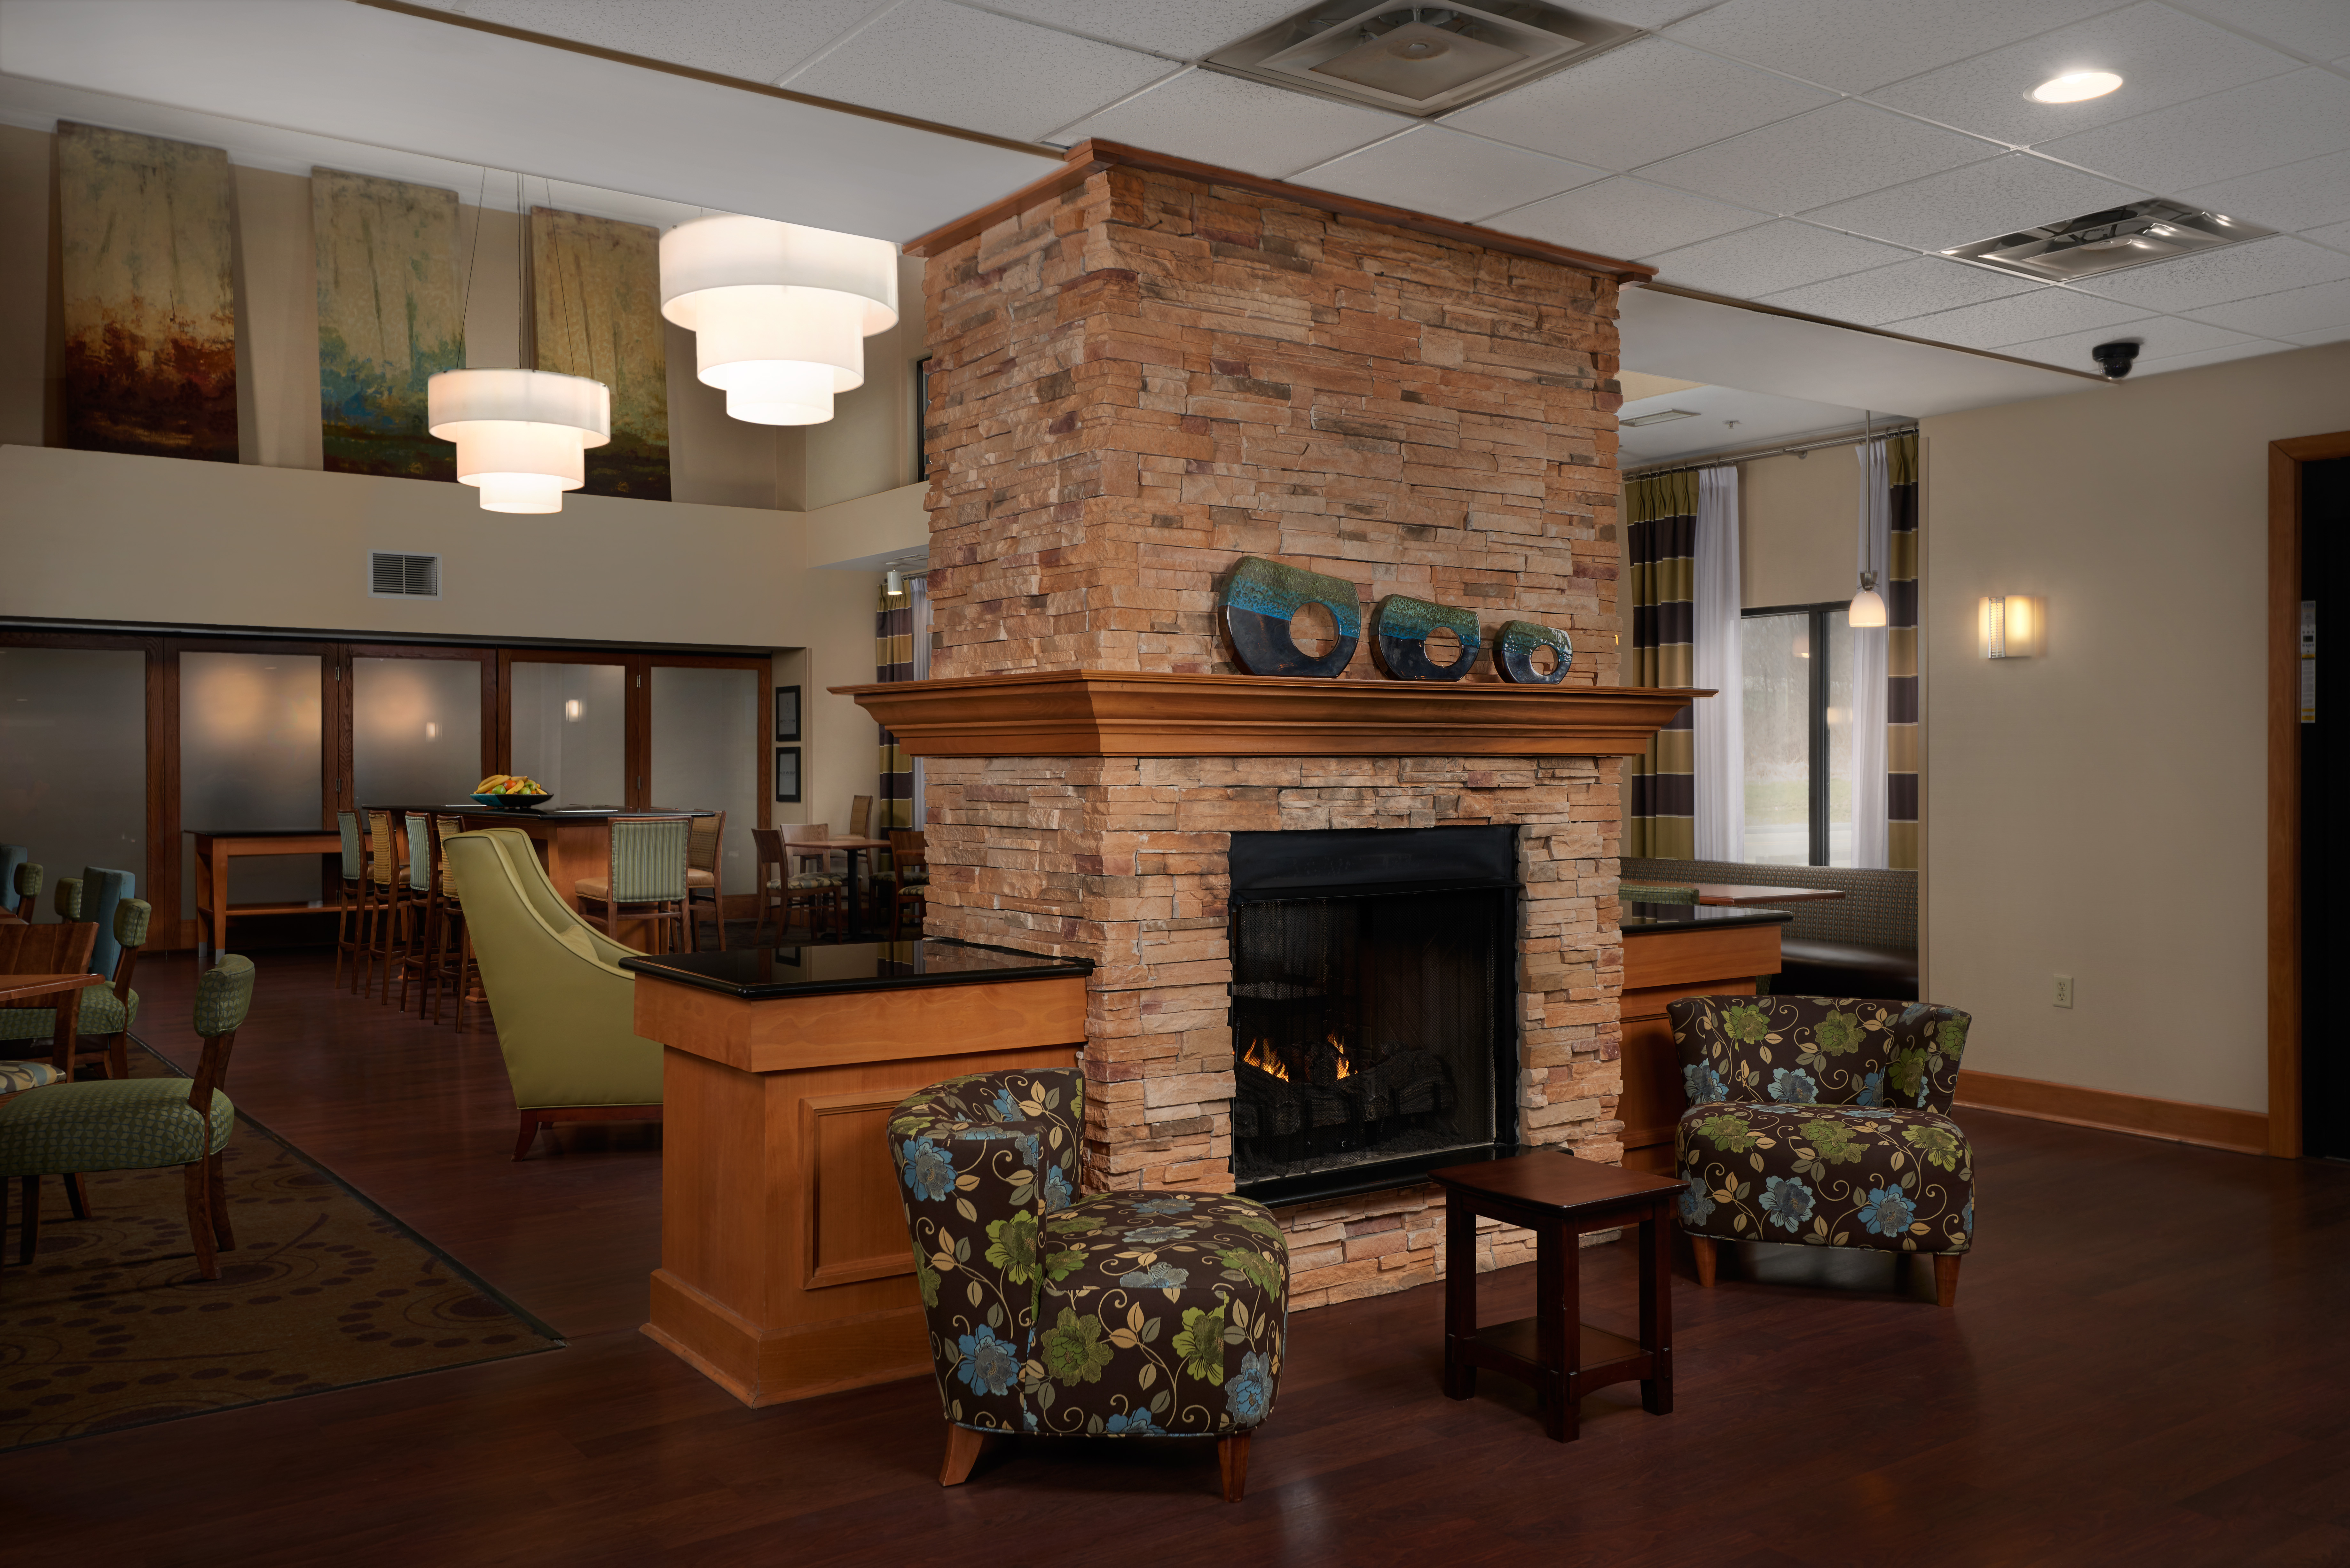 Lobby Area with Fireplace